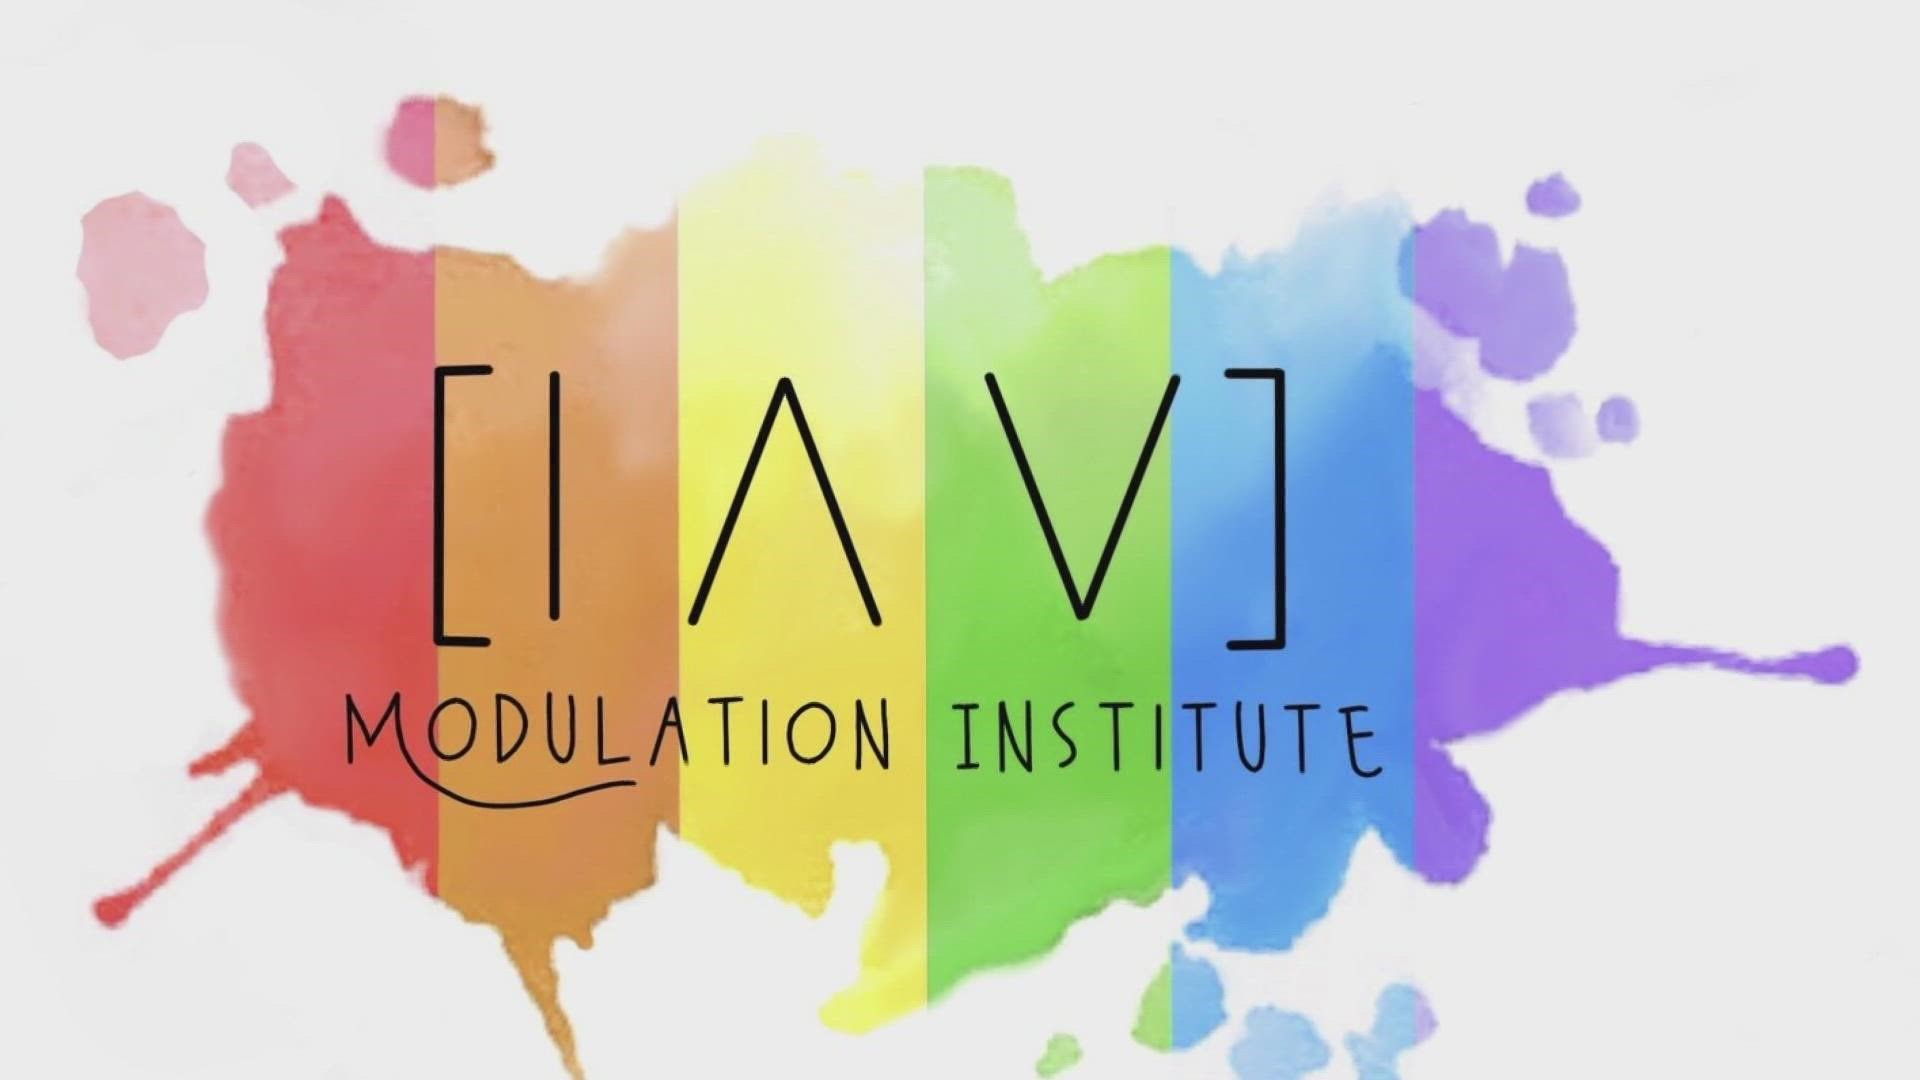 The Modulation Institute works with people on vocal feminization, vocal masculinization, and non-binary vocal expressions.